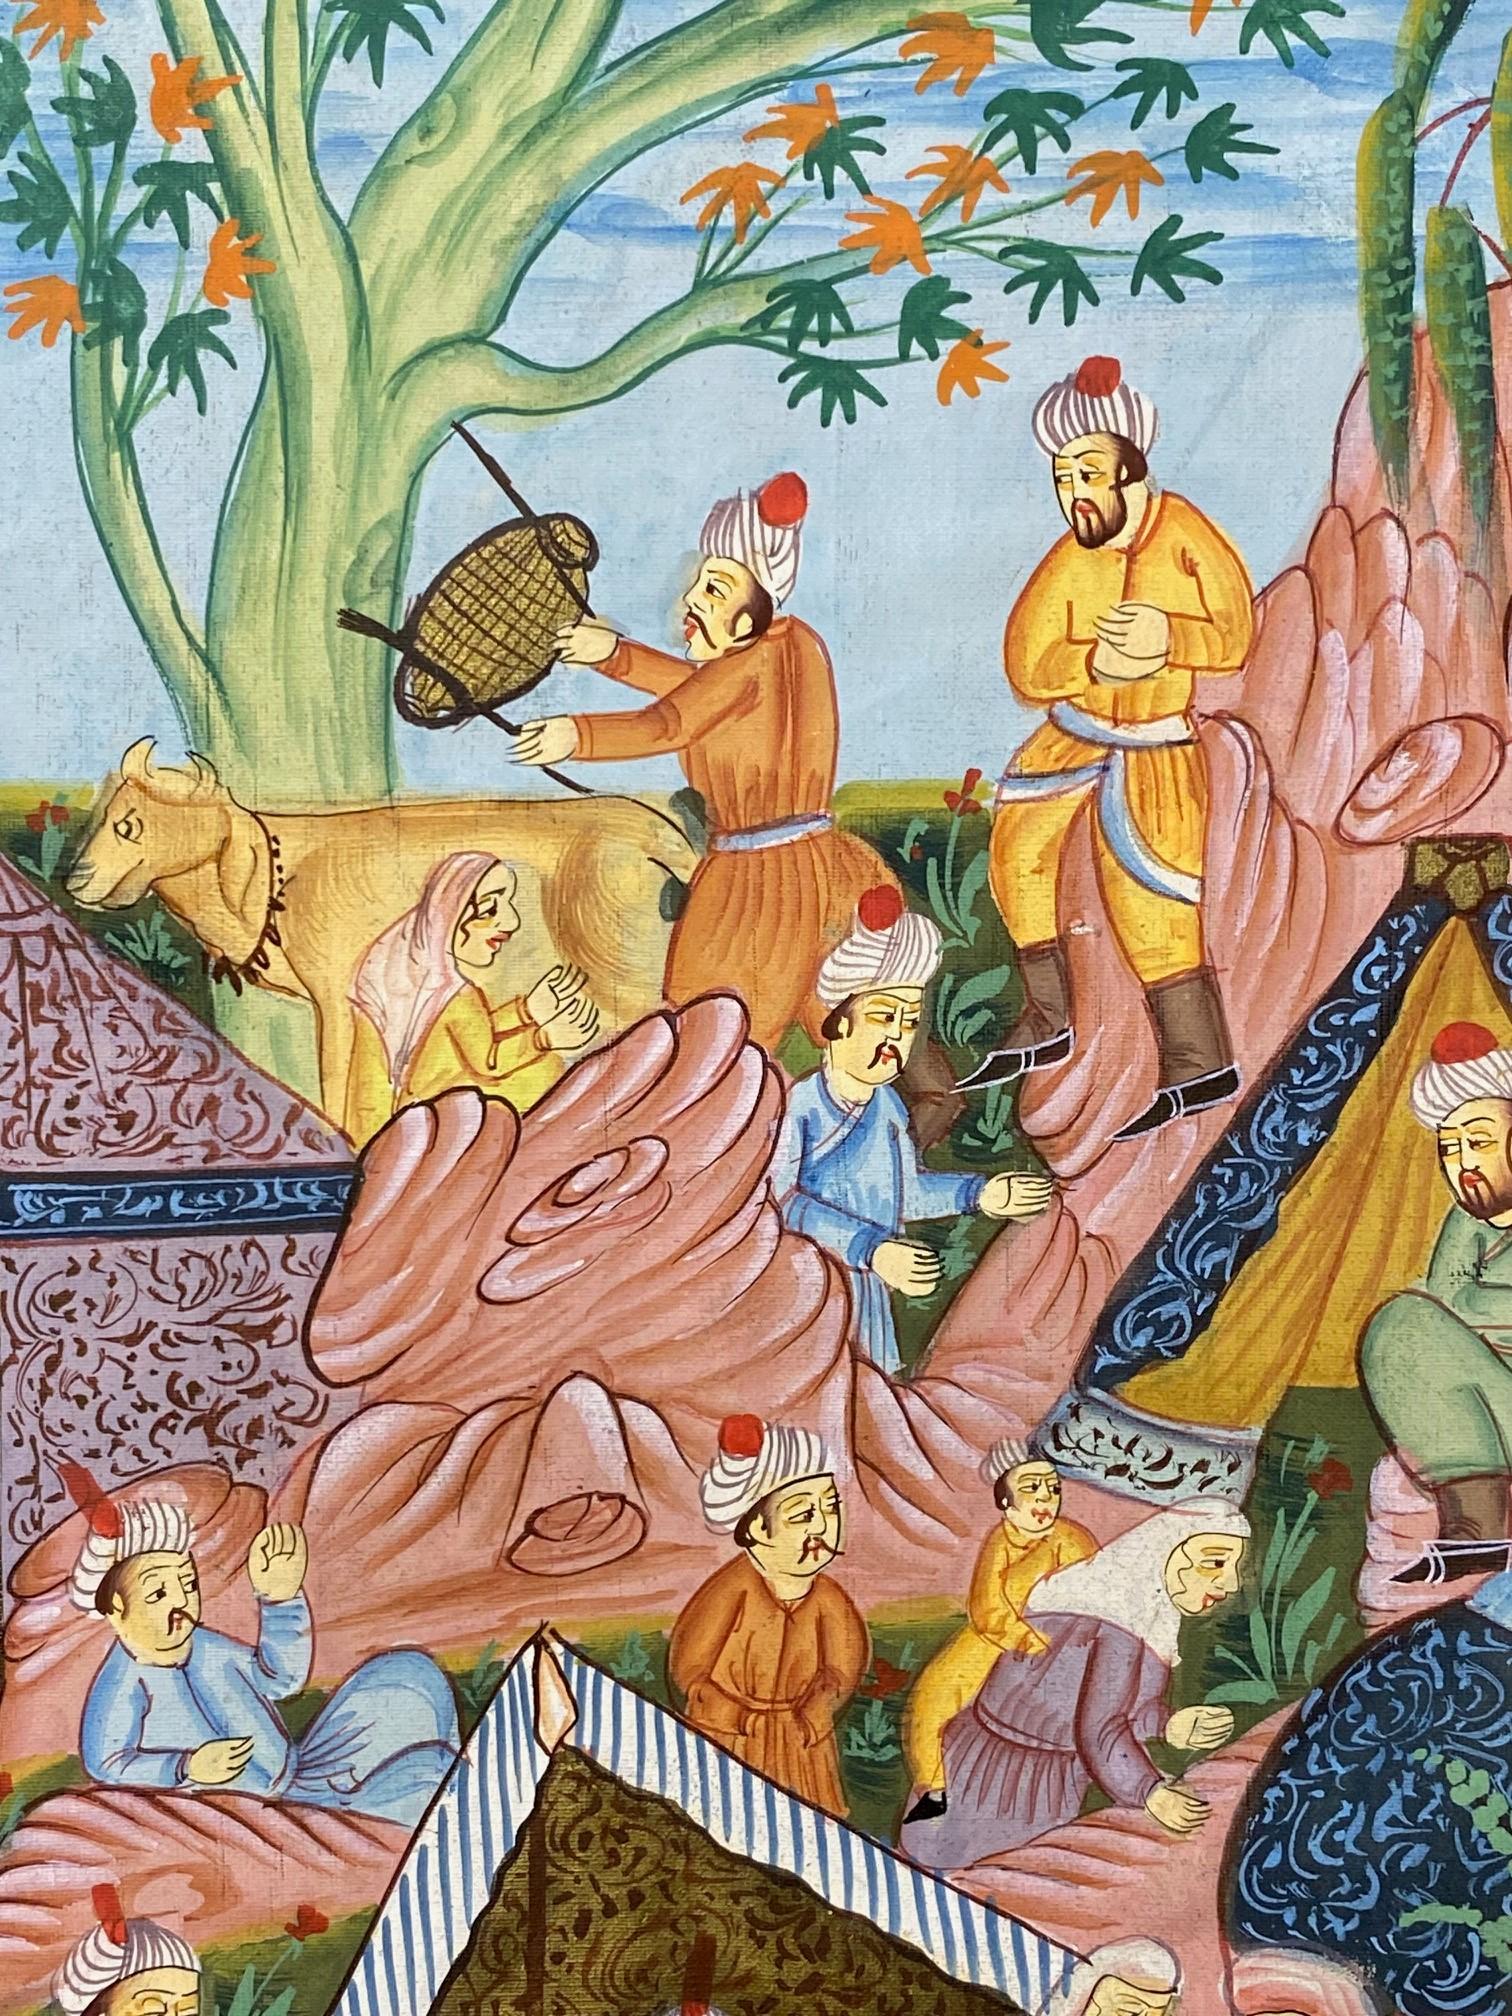 Hand-Painted South Indian India Rajasthan Signed Minature Painting of Village Desert Scene For Sale